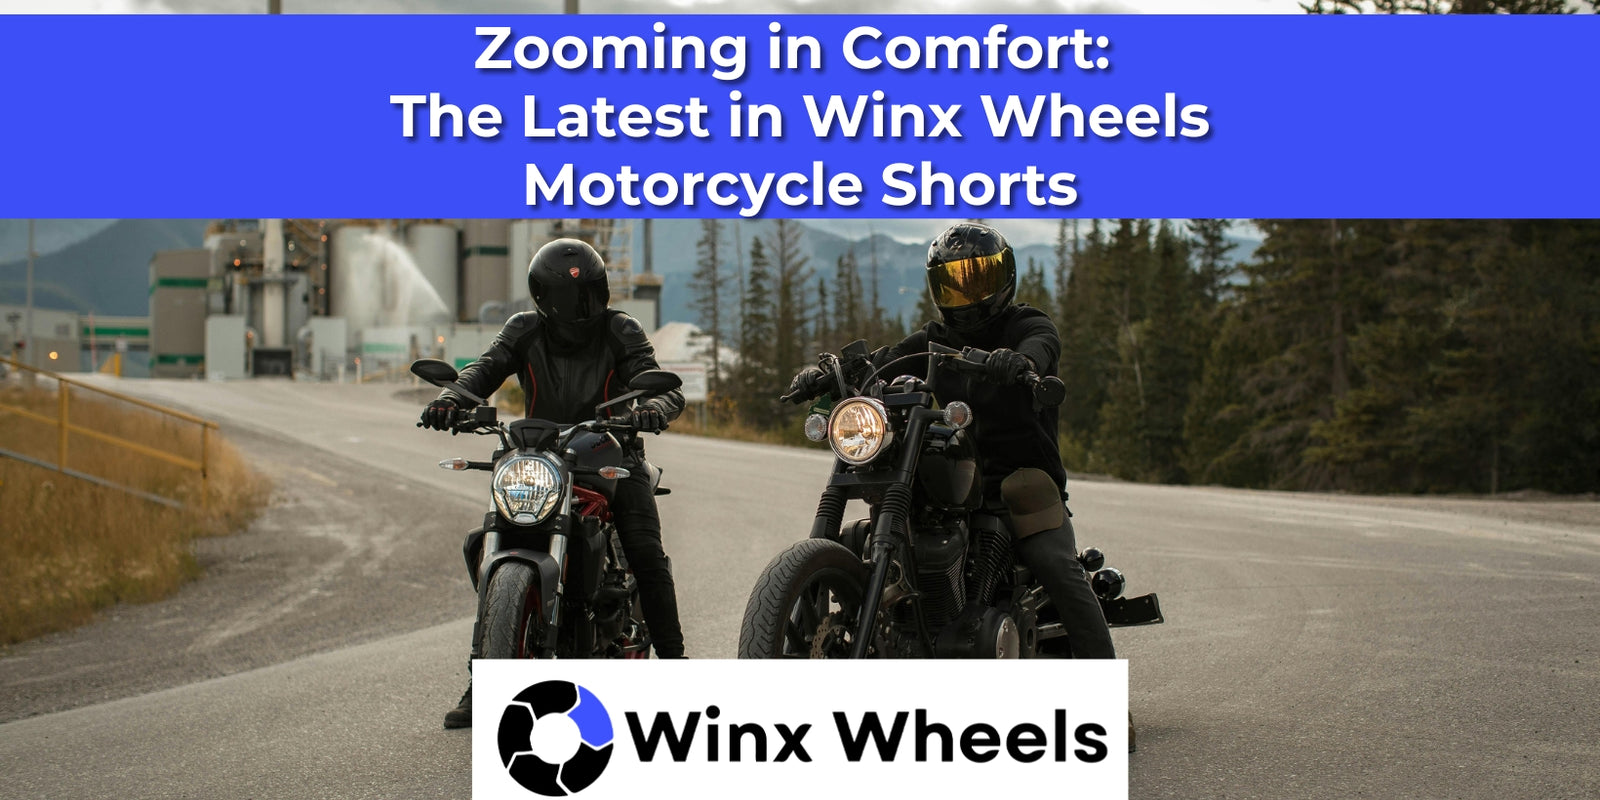 Zooming in Comfort: The Latest in Winx Wheels Motorcycle Shorts